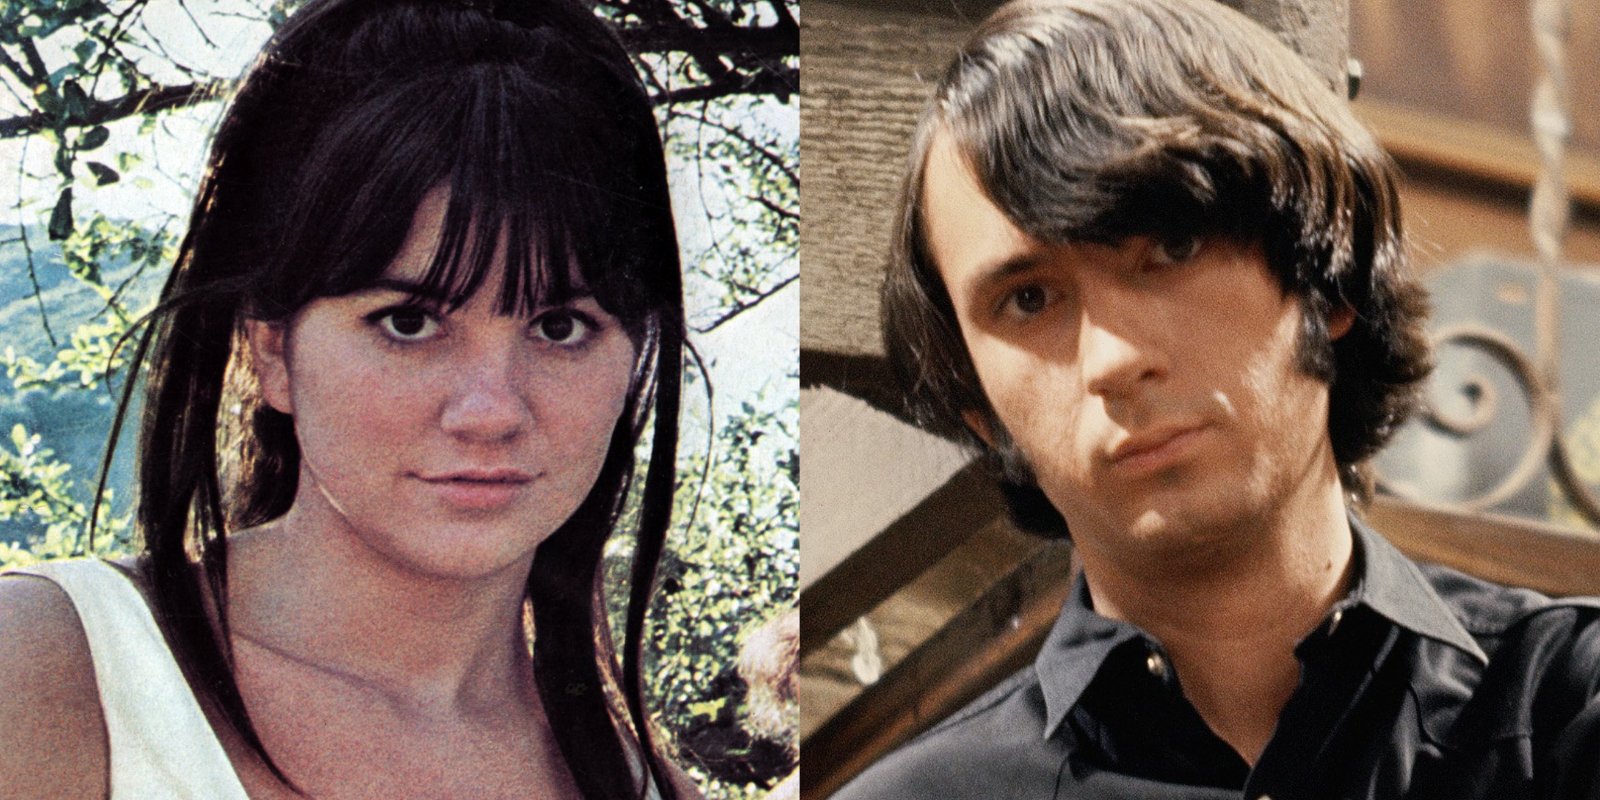 Linda Ronstadt and Mike Nesmith in side by side photographs.